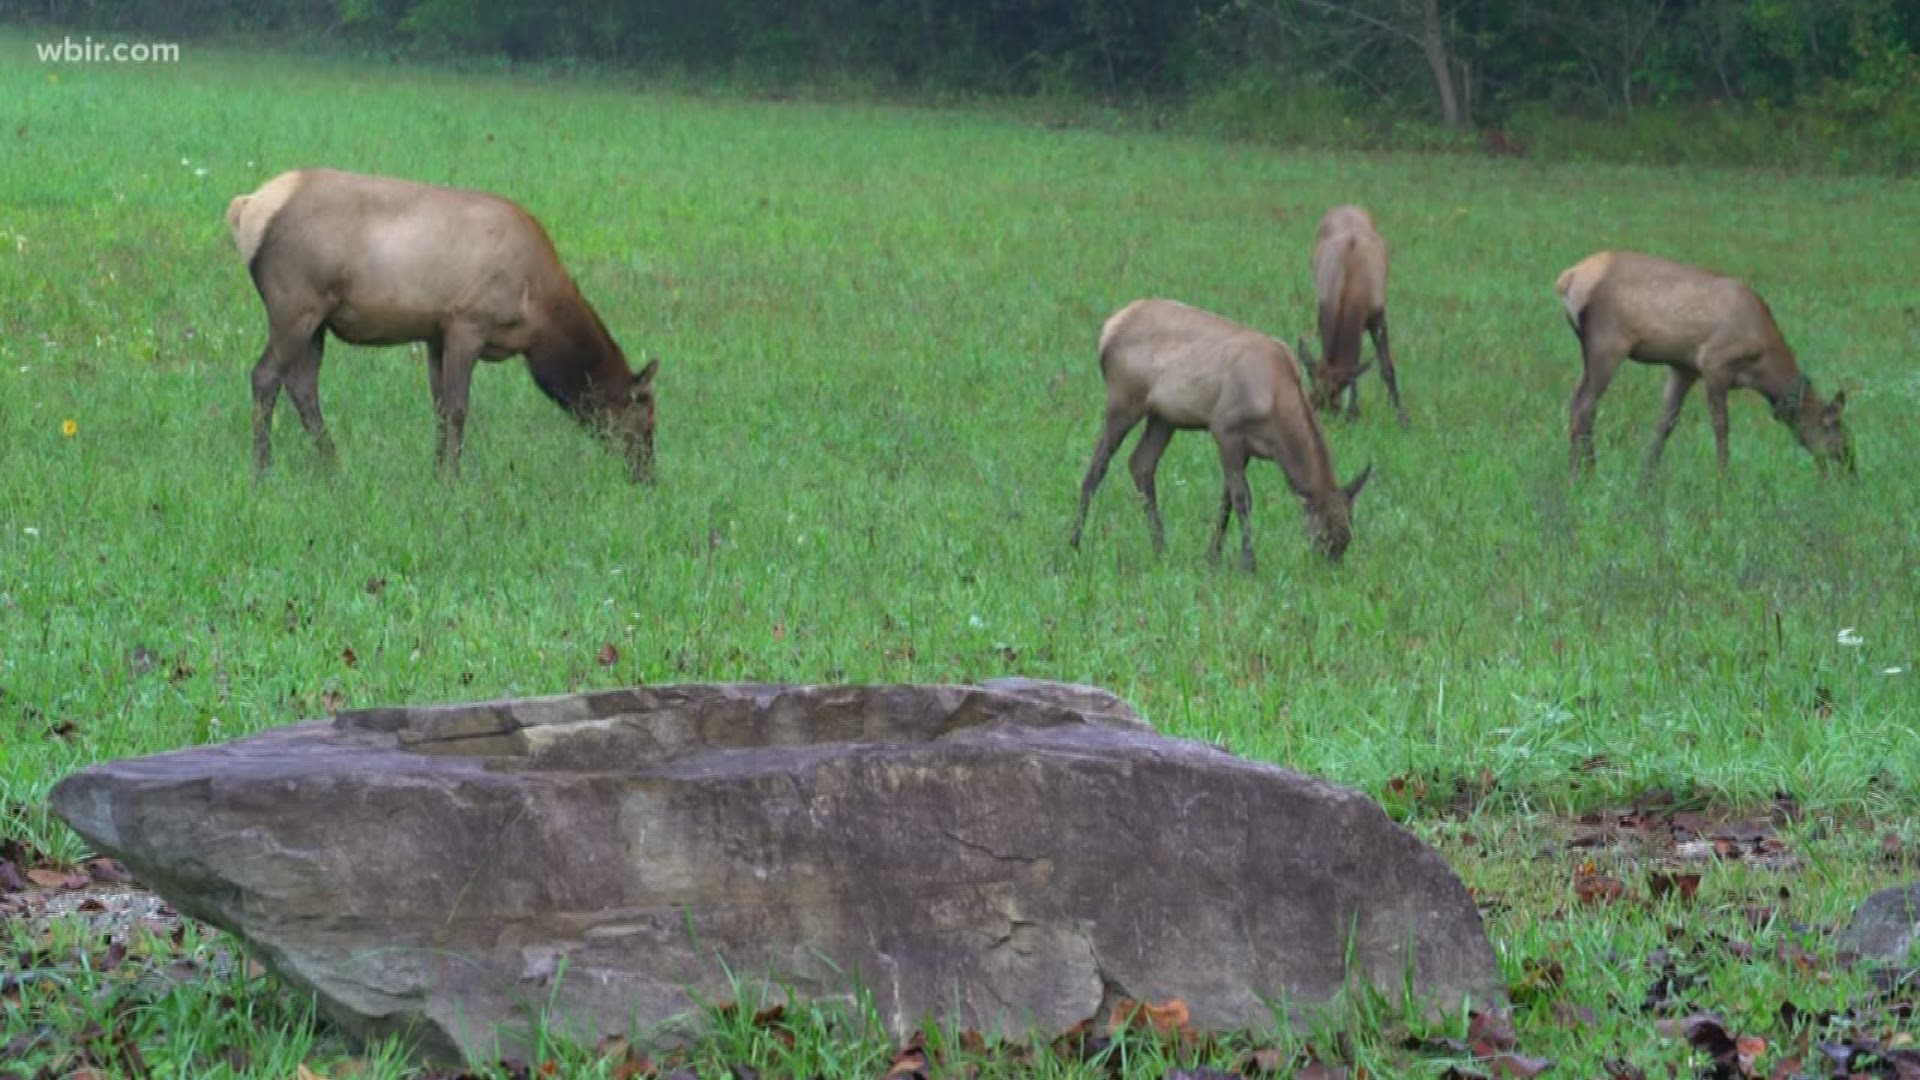 Experts say a big reason the elk population has taken off is that the elk wised up and adapted to living with predators in the Smokies.